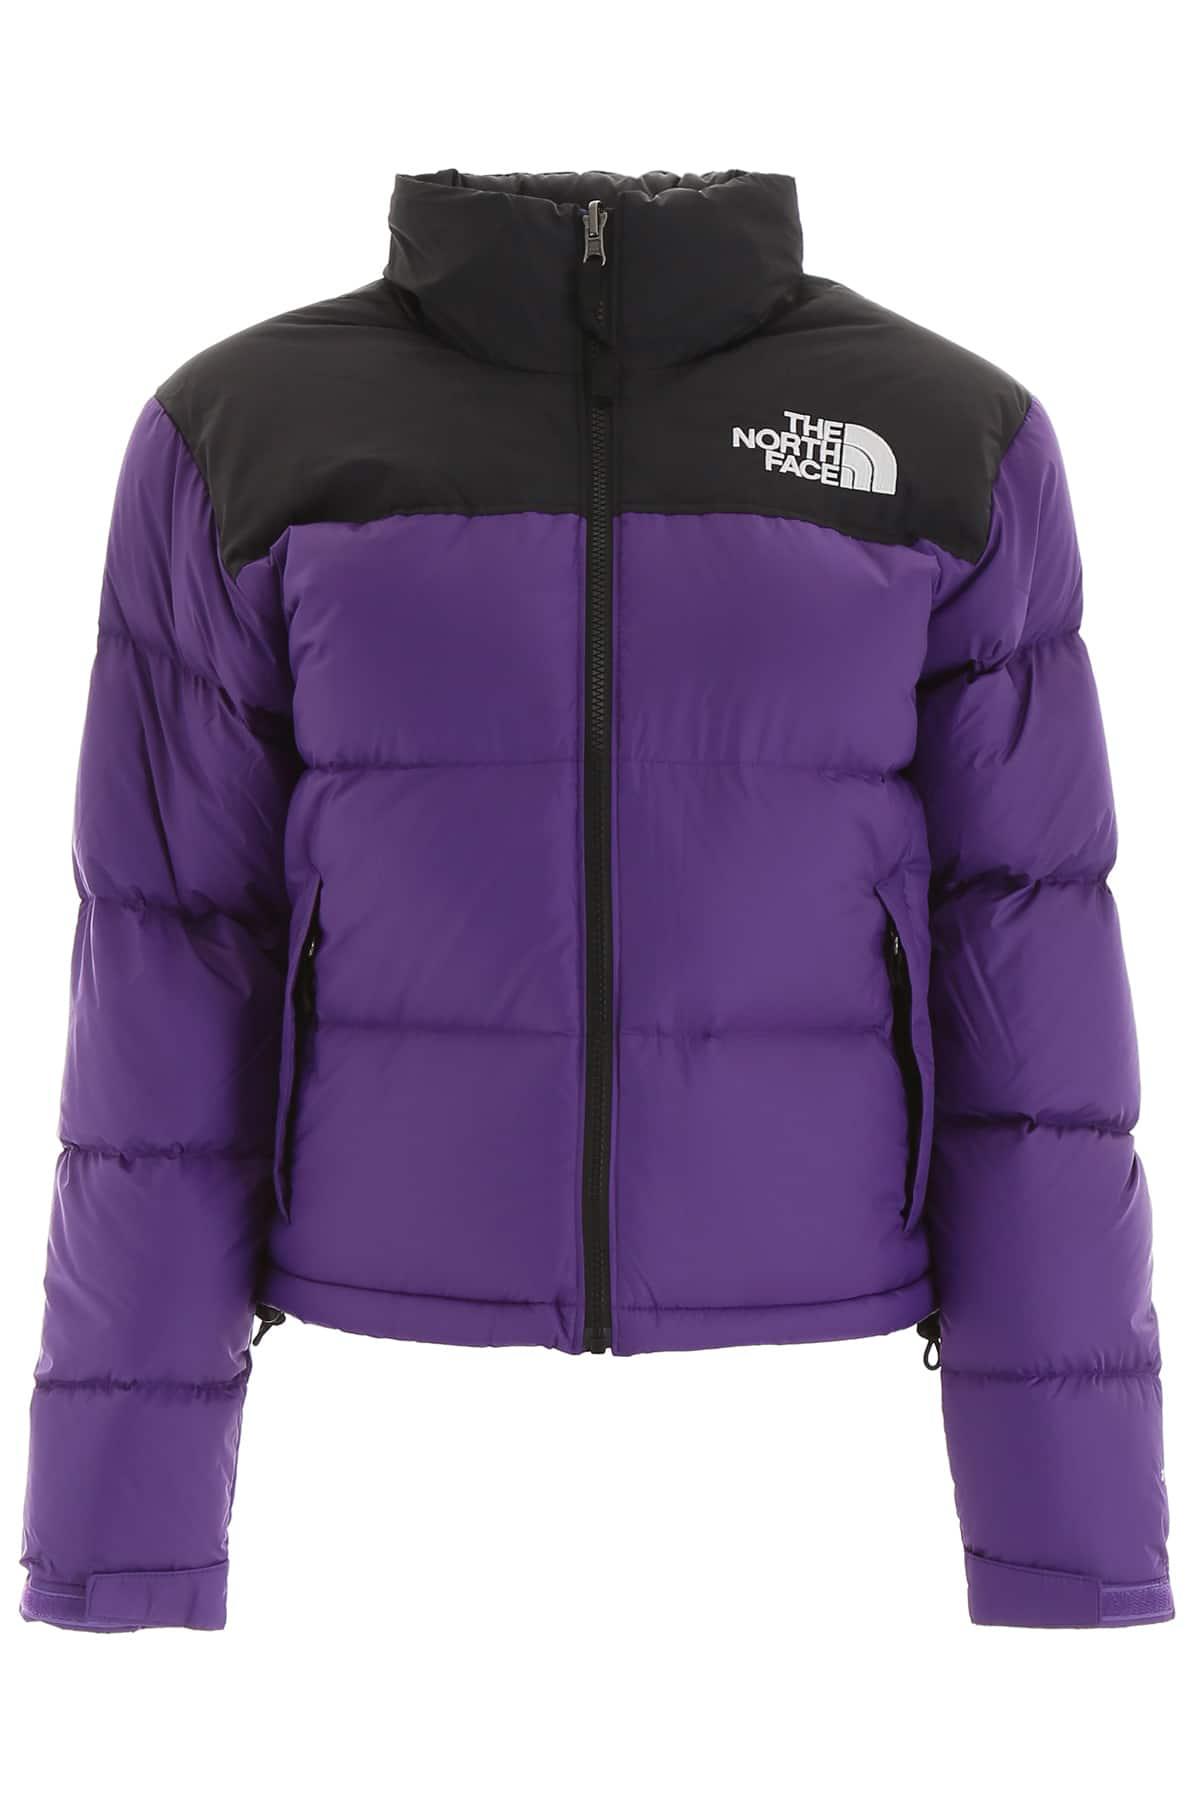 purple and black north face jacket 